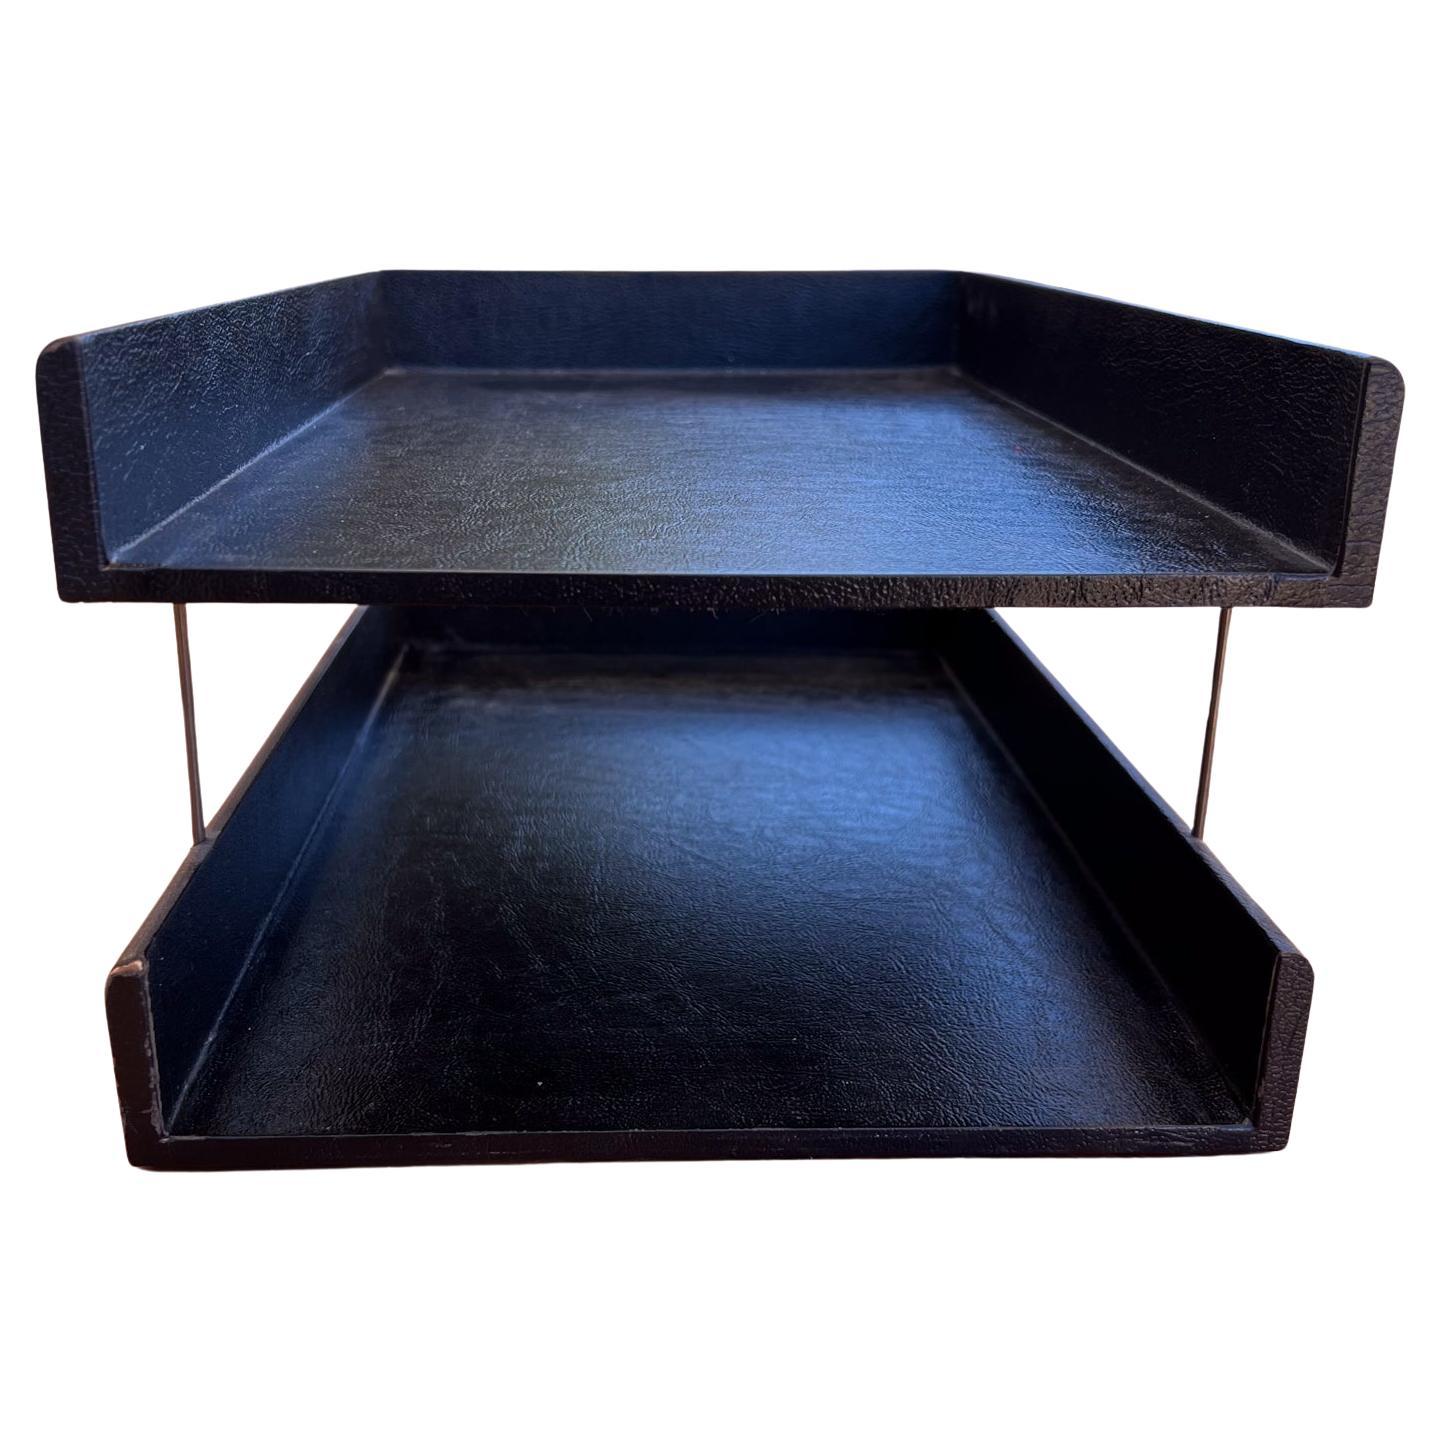 1970s Black Desk Tray Tiered Office Letter File For Sale